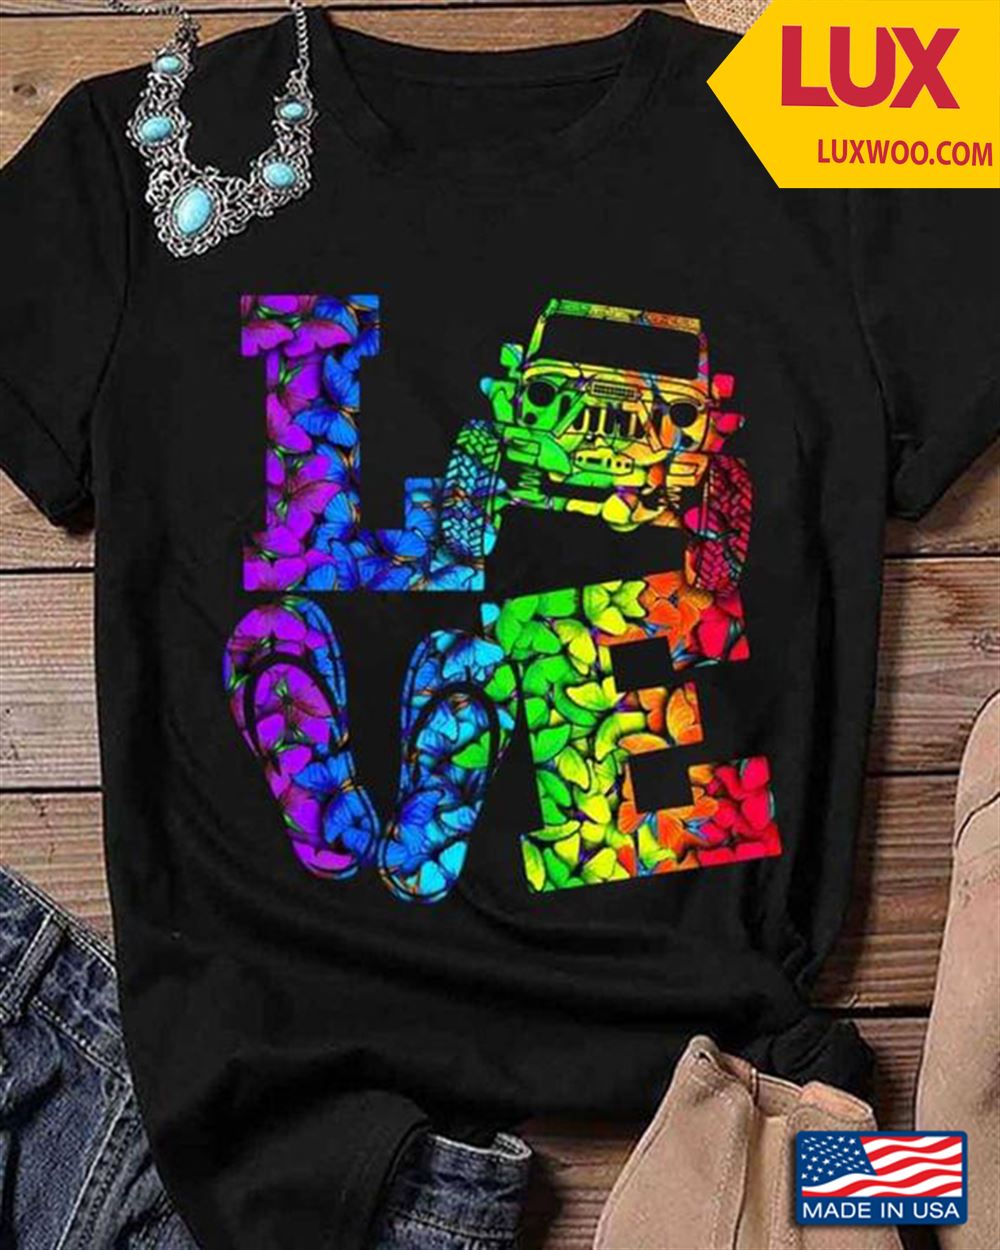 Colorful Love Jeep Butterflies Shirt Size Up To 5xl